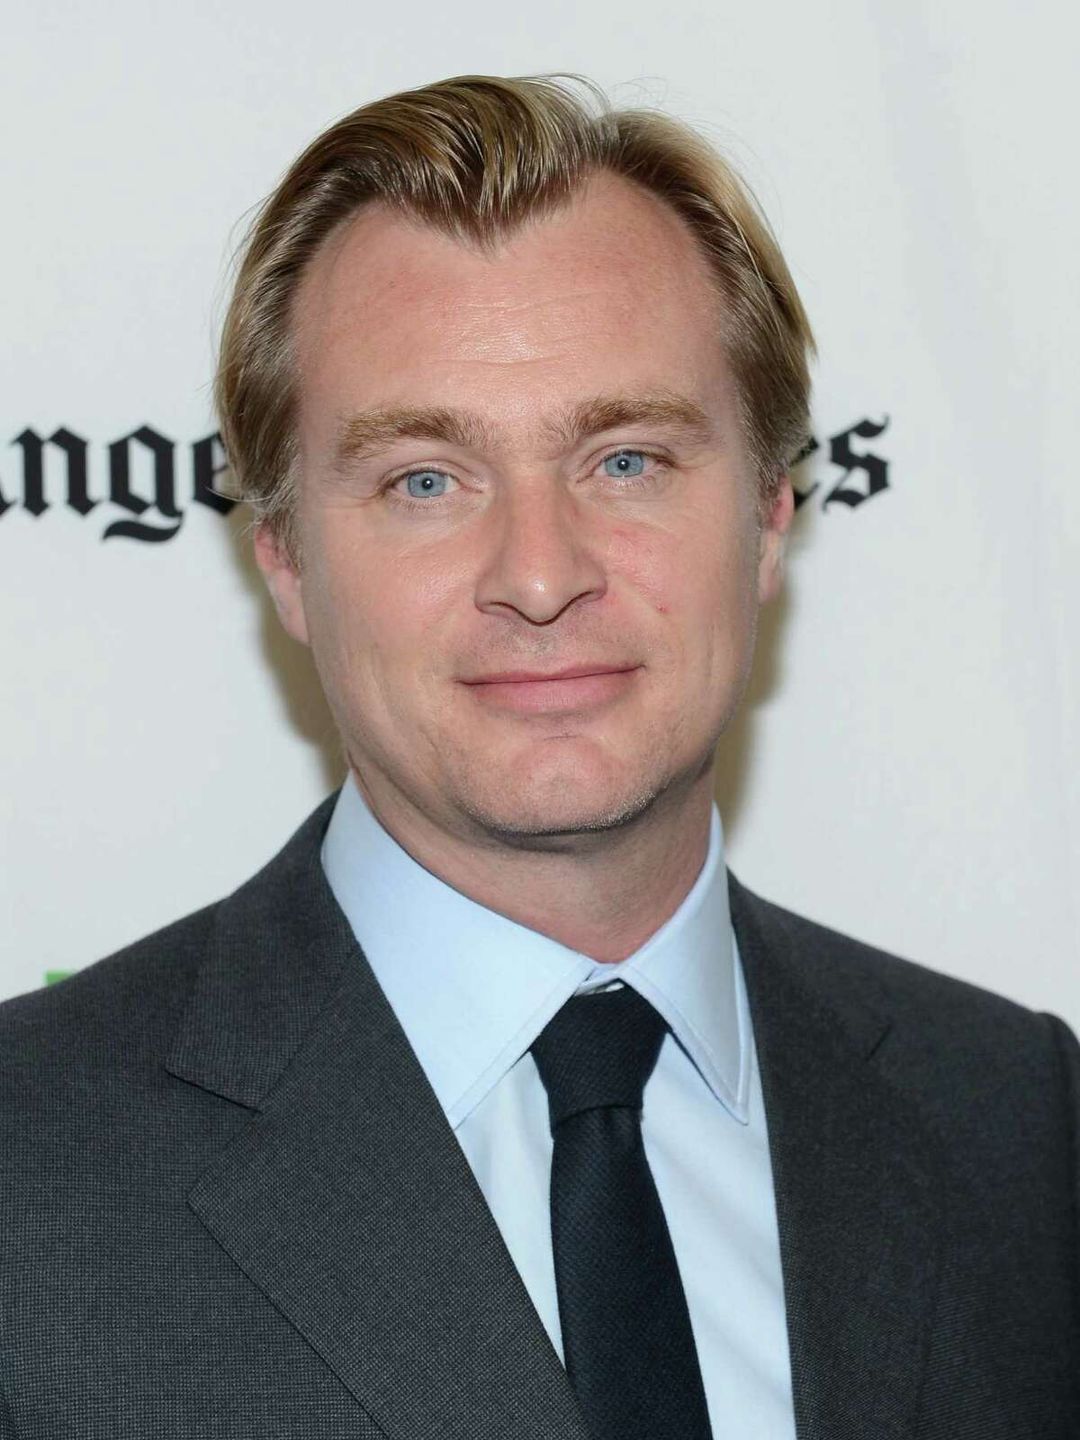 Christopher Nolan who is his mother